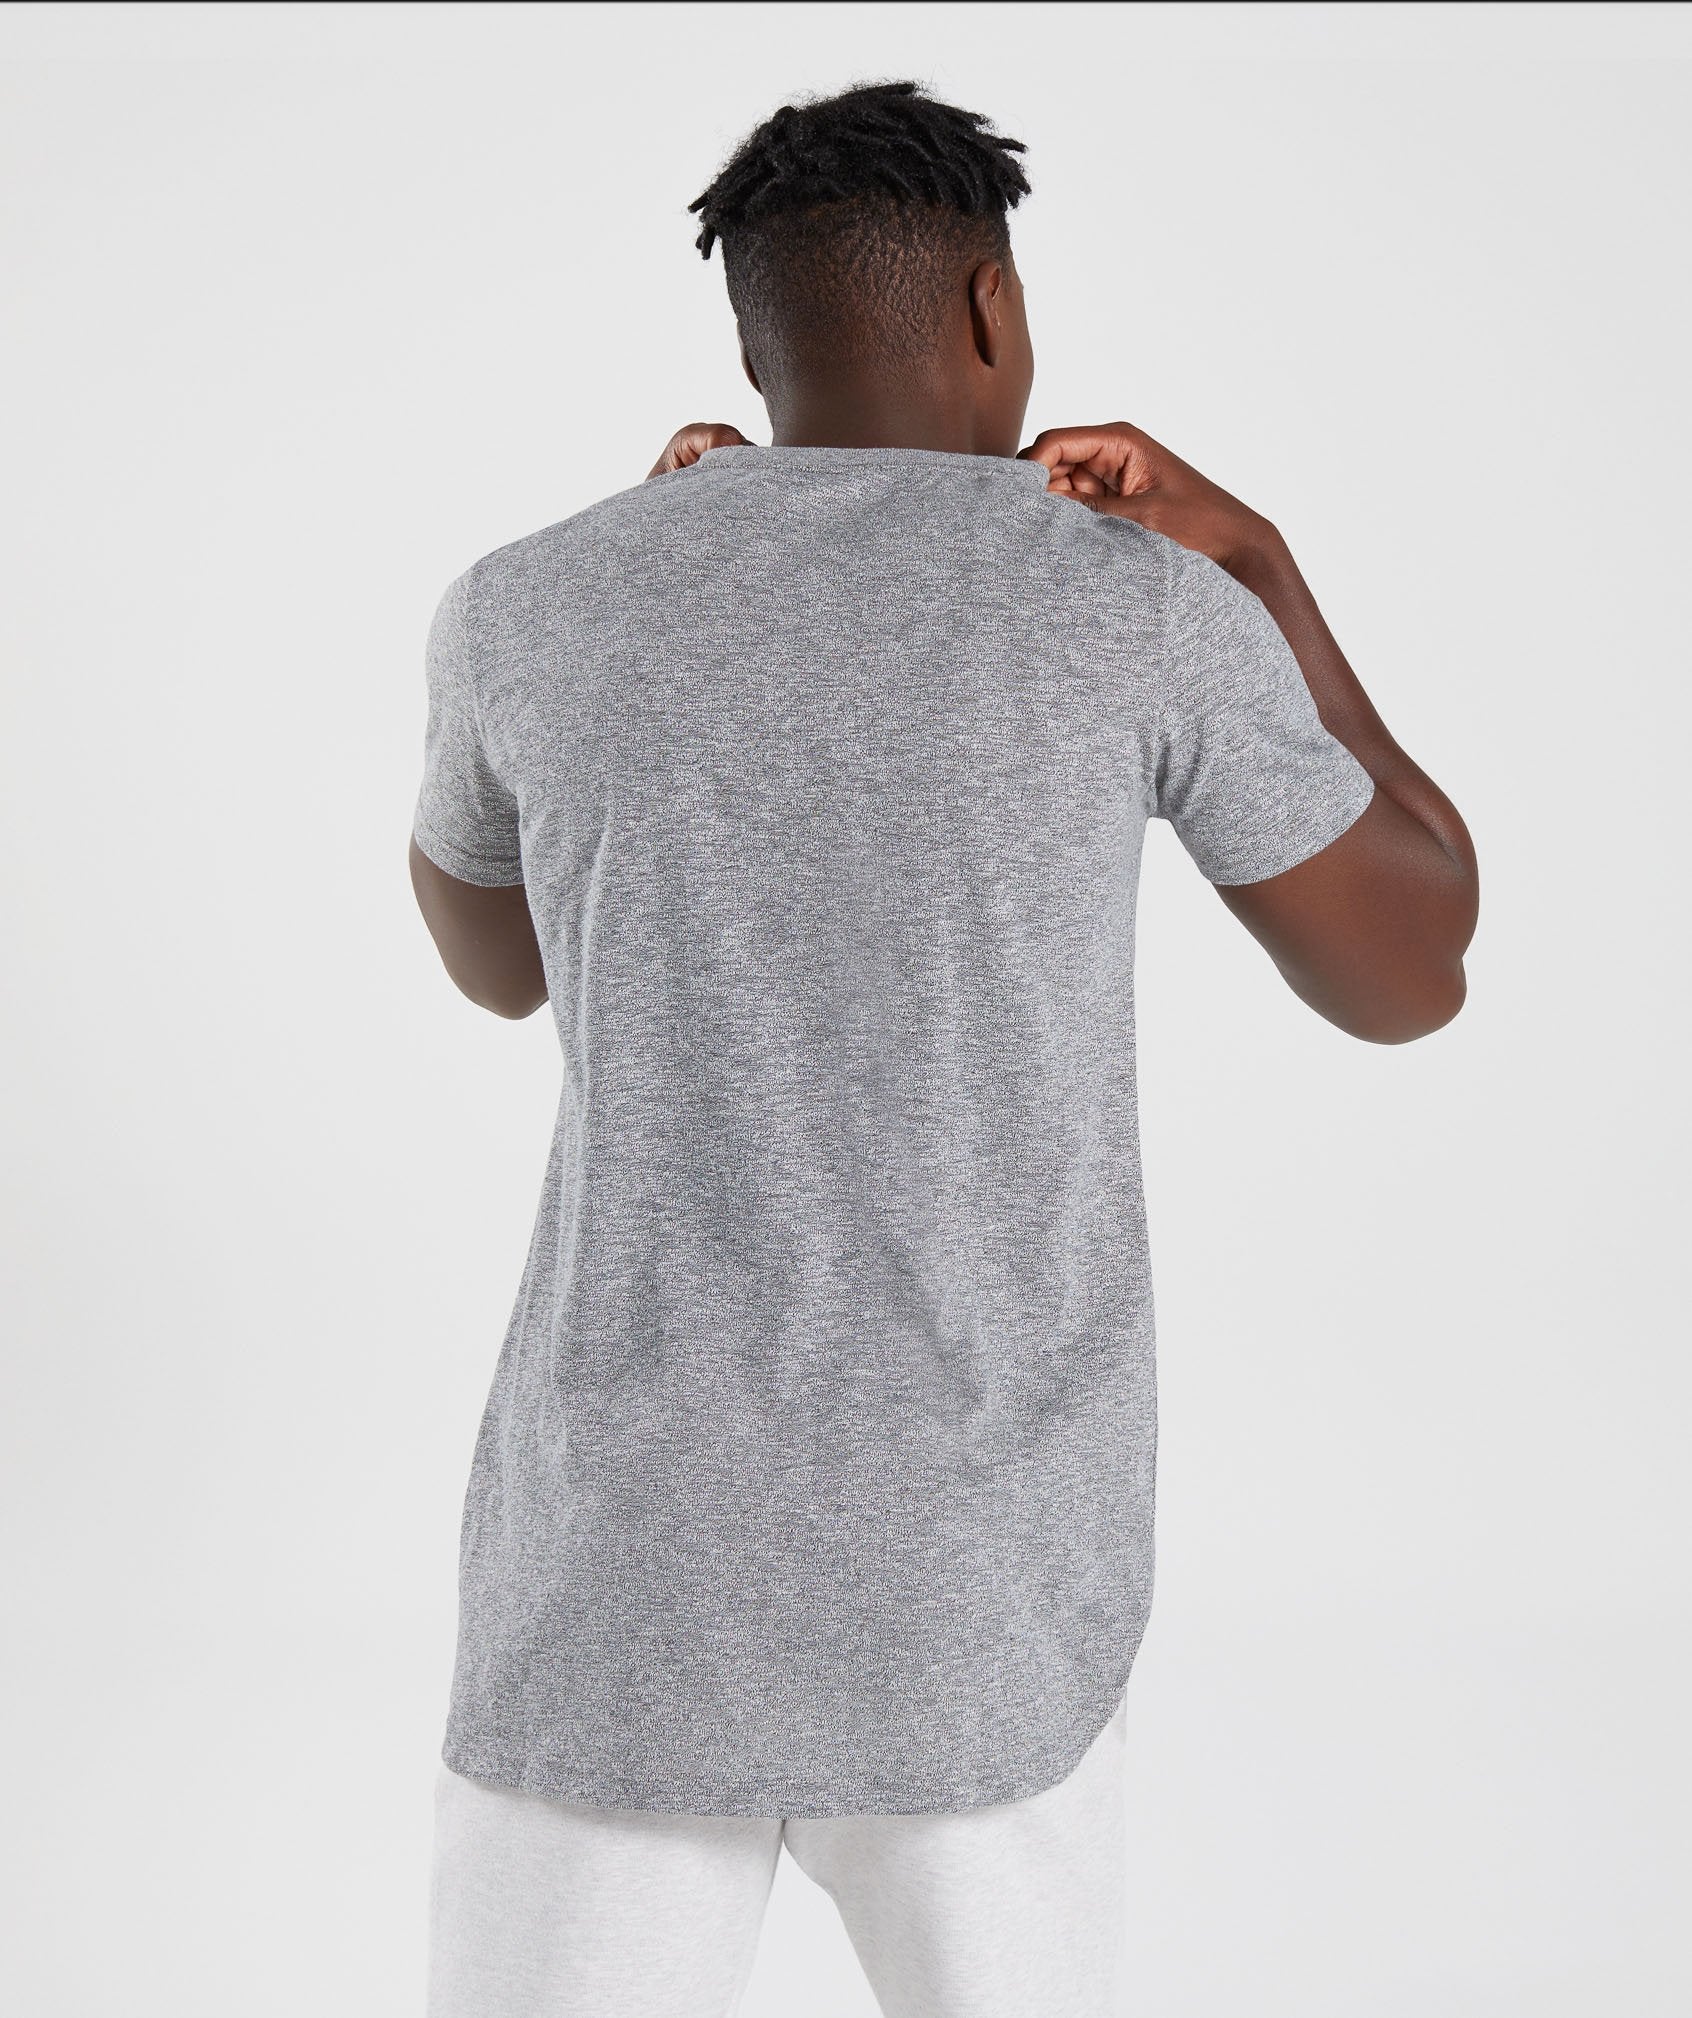 Heather T-Shirt in Charcoal Marl - view 2